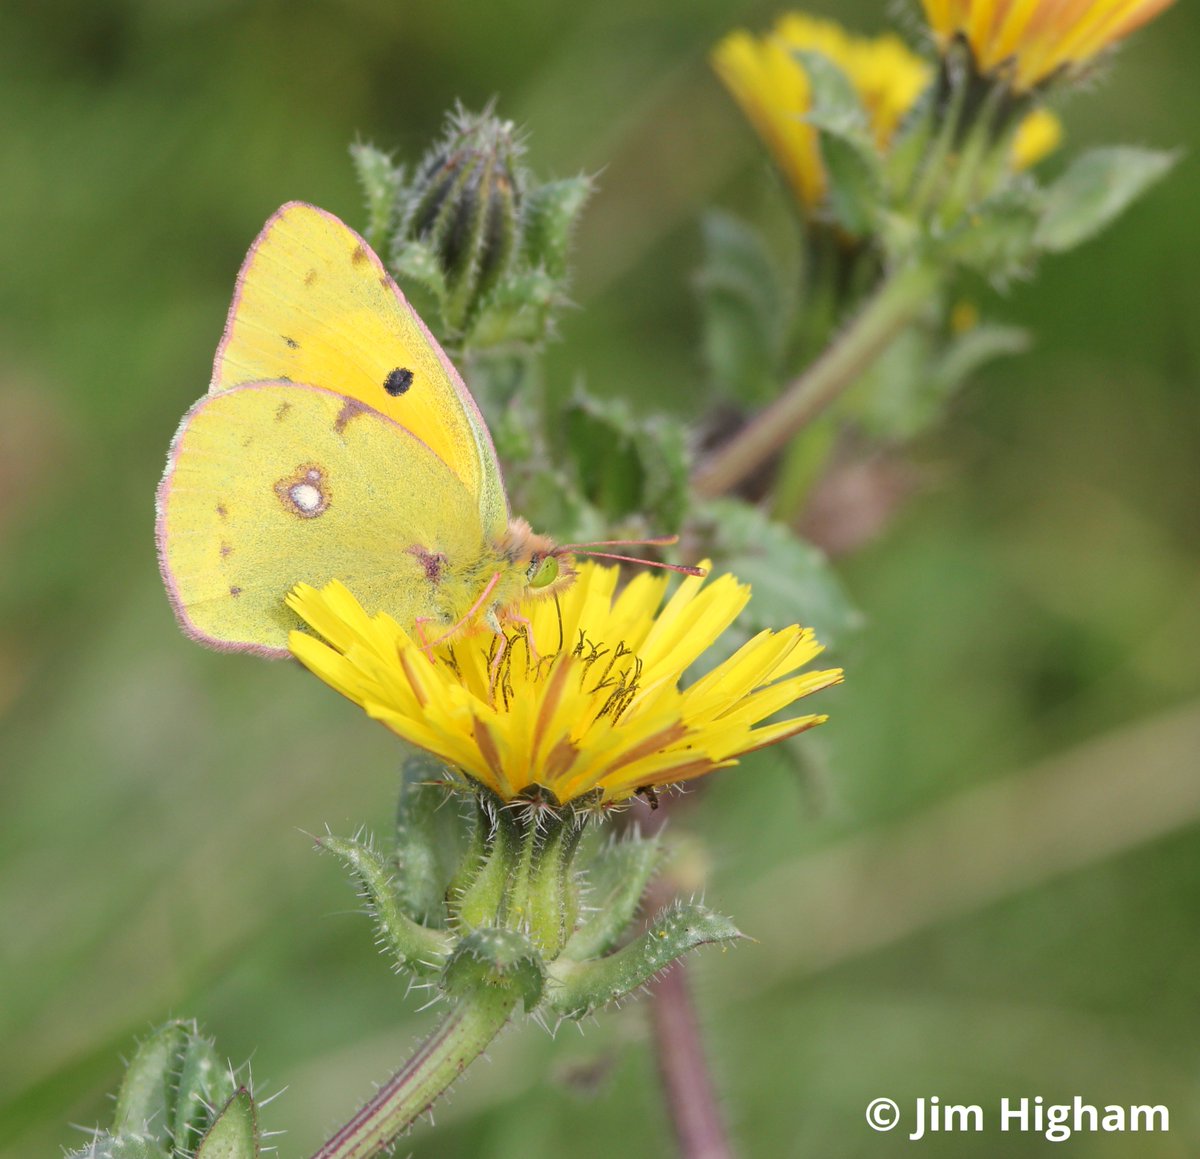 💛 Meet the Clouded Yellow! 🦋 This medium-sized, golden-yellow #butterfly migrates here from North Africa & Southern Europe with numbers peaking around August. 🔎 Good places to spot Clouded Yellows in Herts include: Hilfield Park Reservoir & Waterford Heath